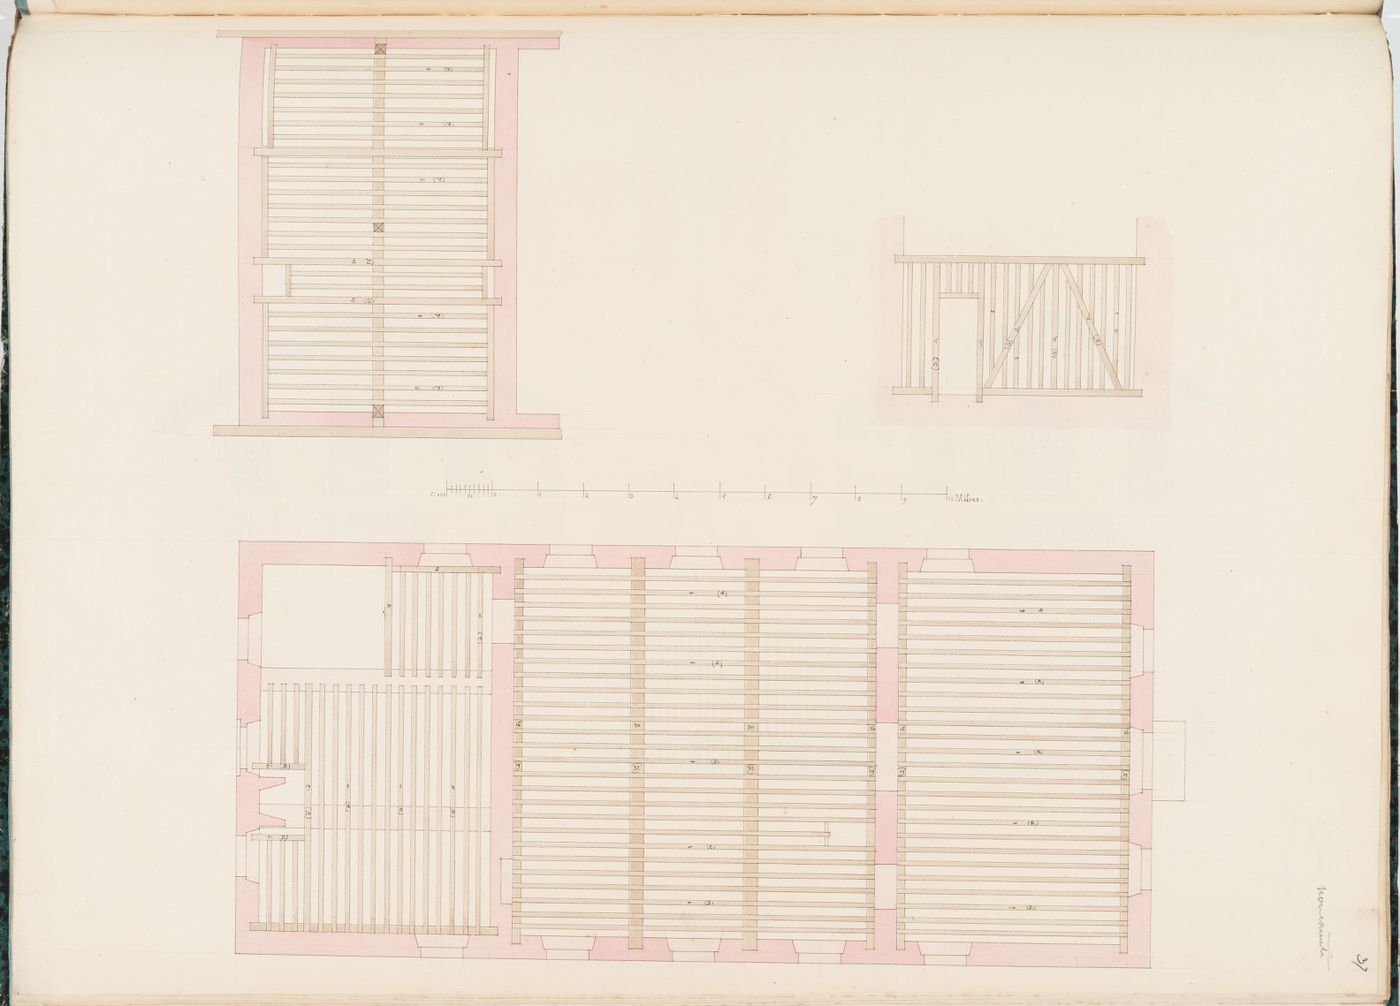 Floor framing plans and a section showing wall framing for a manège, Parc de Clichy